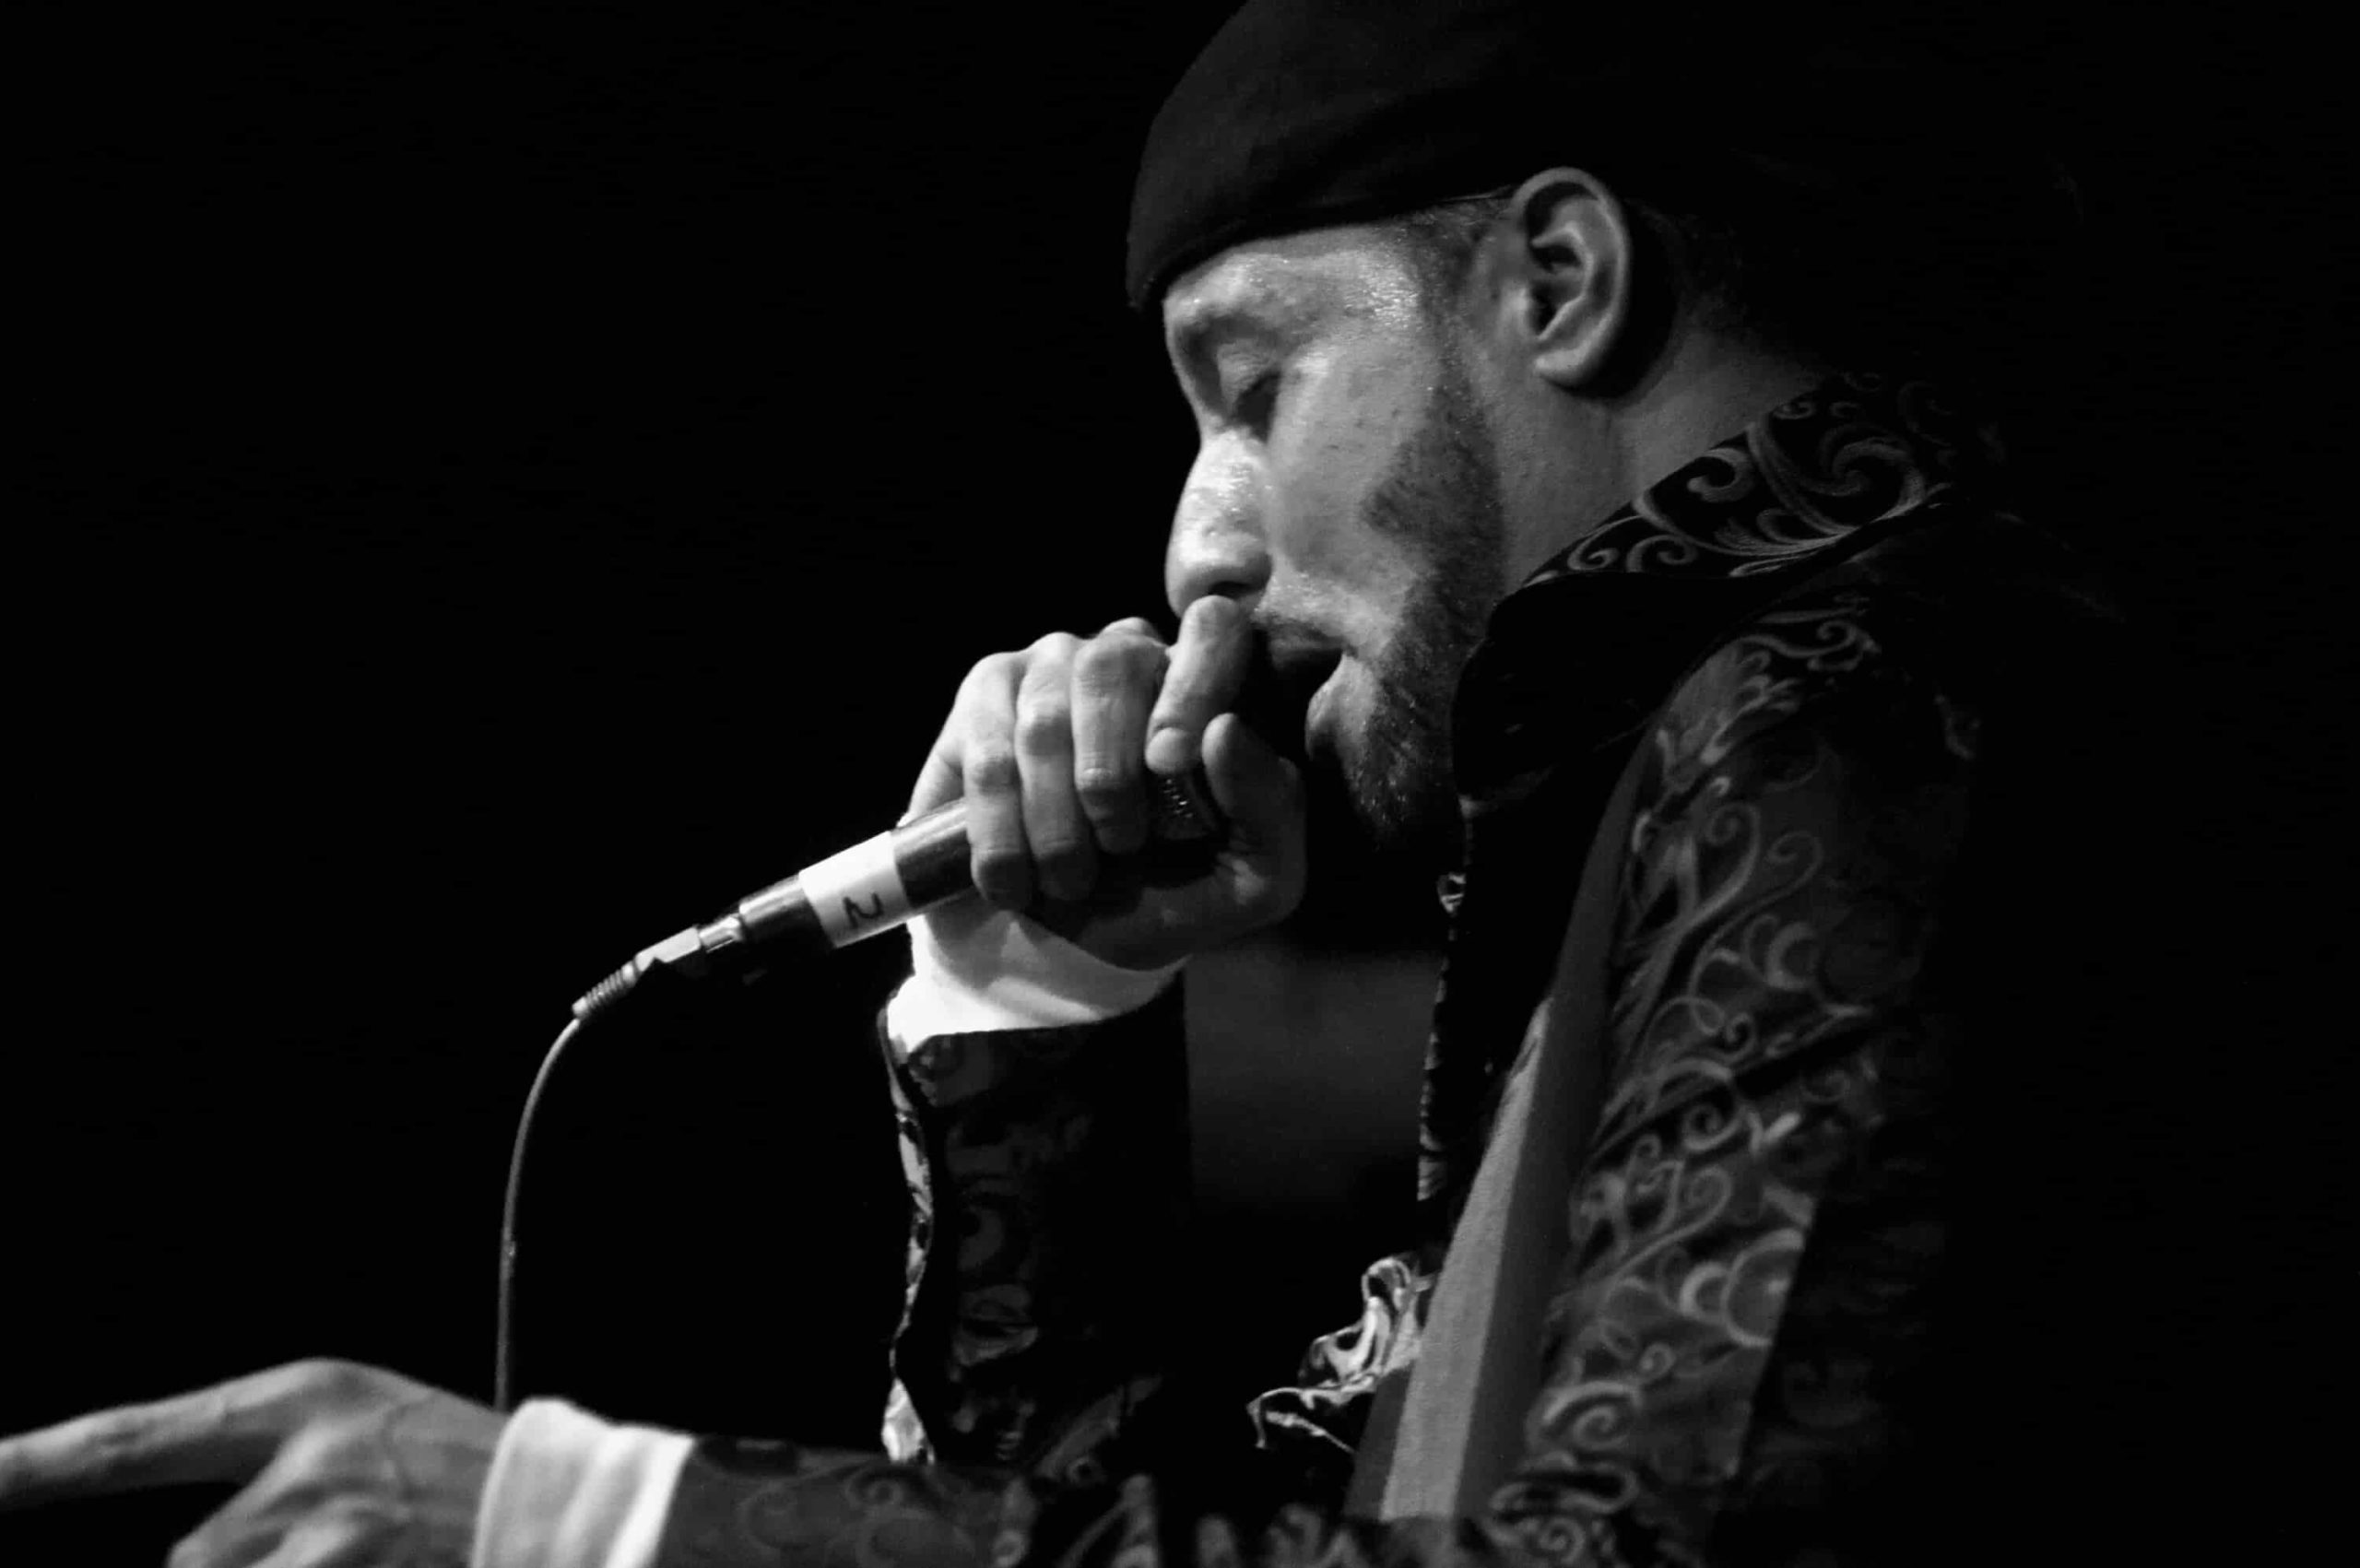 Image of R.A. the Rugged Man